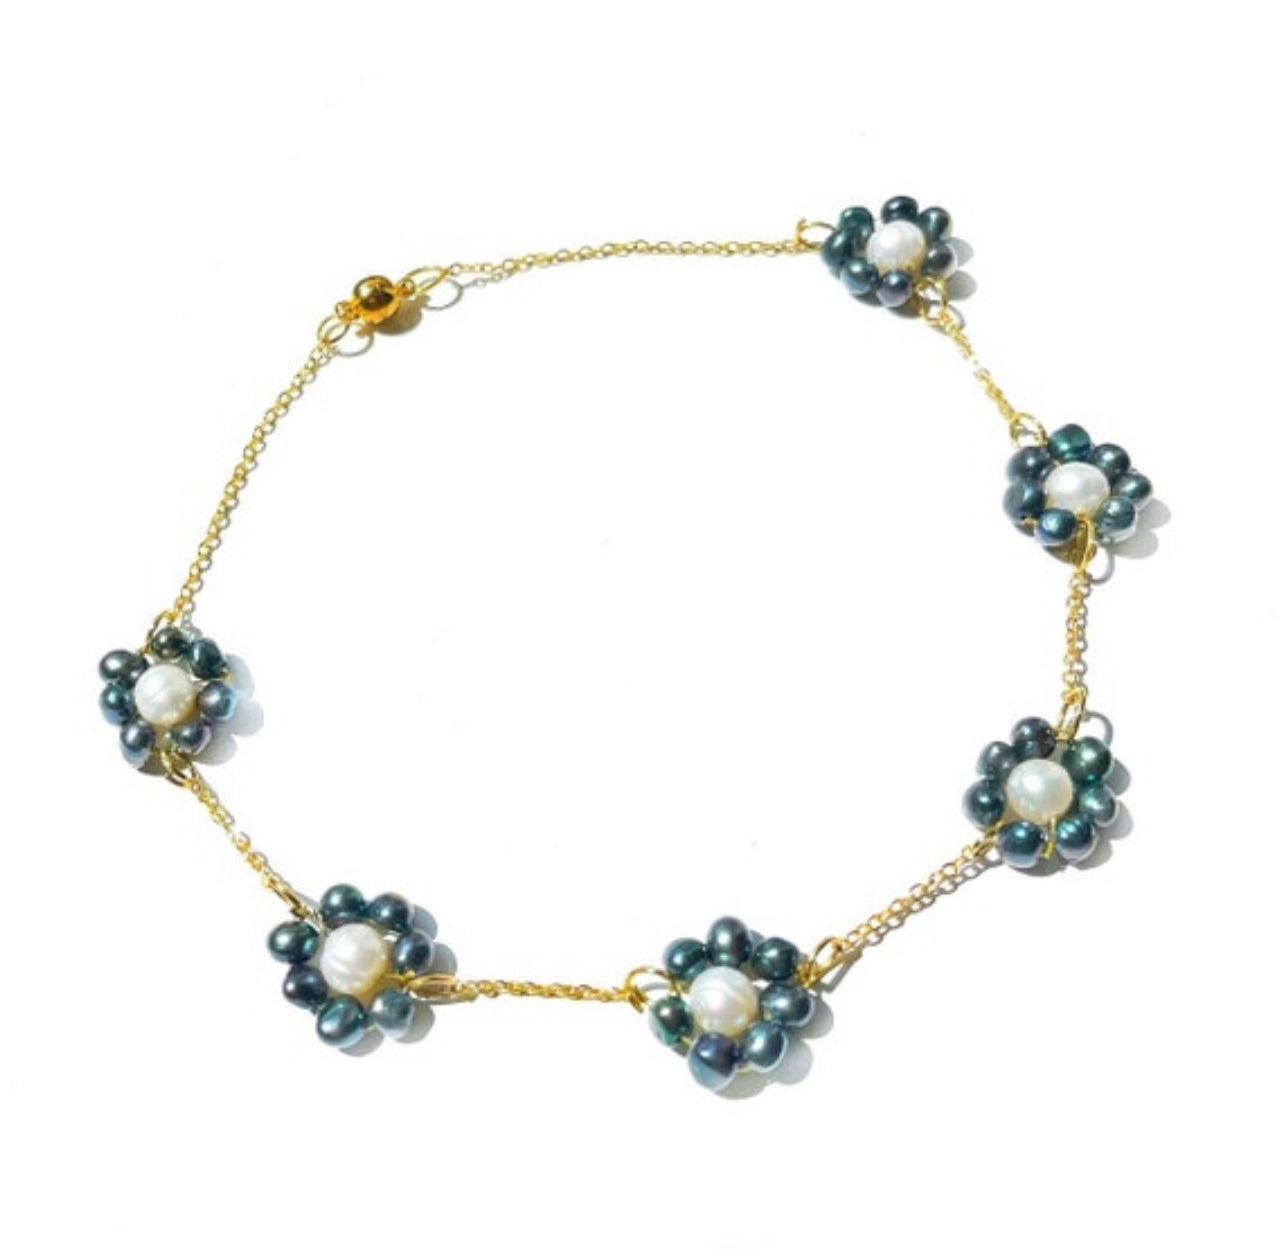 Dainty pearl choker necklace with dainty gold chain and blue and white freshwater pearl beads, summer chain necklace